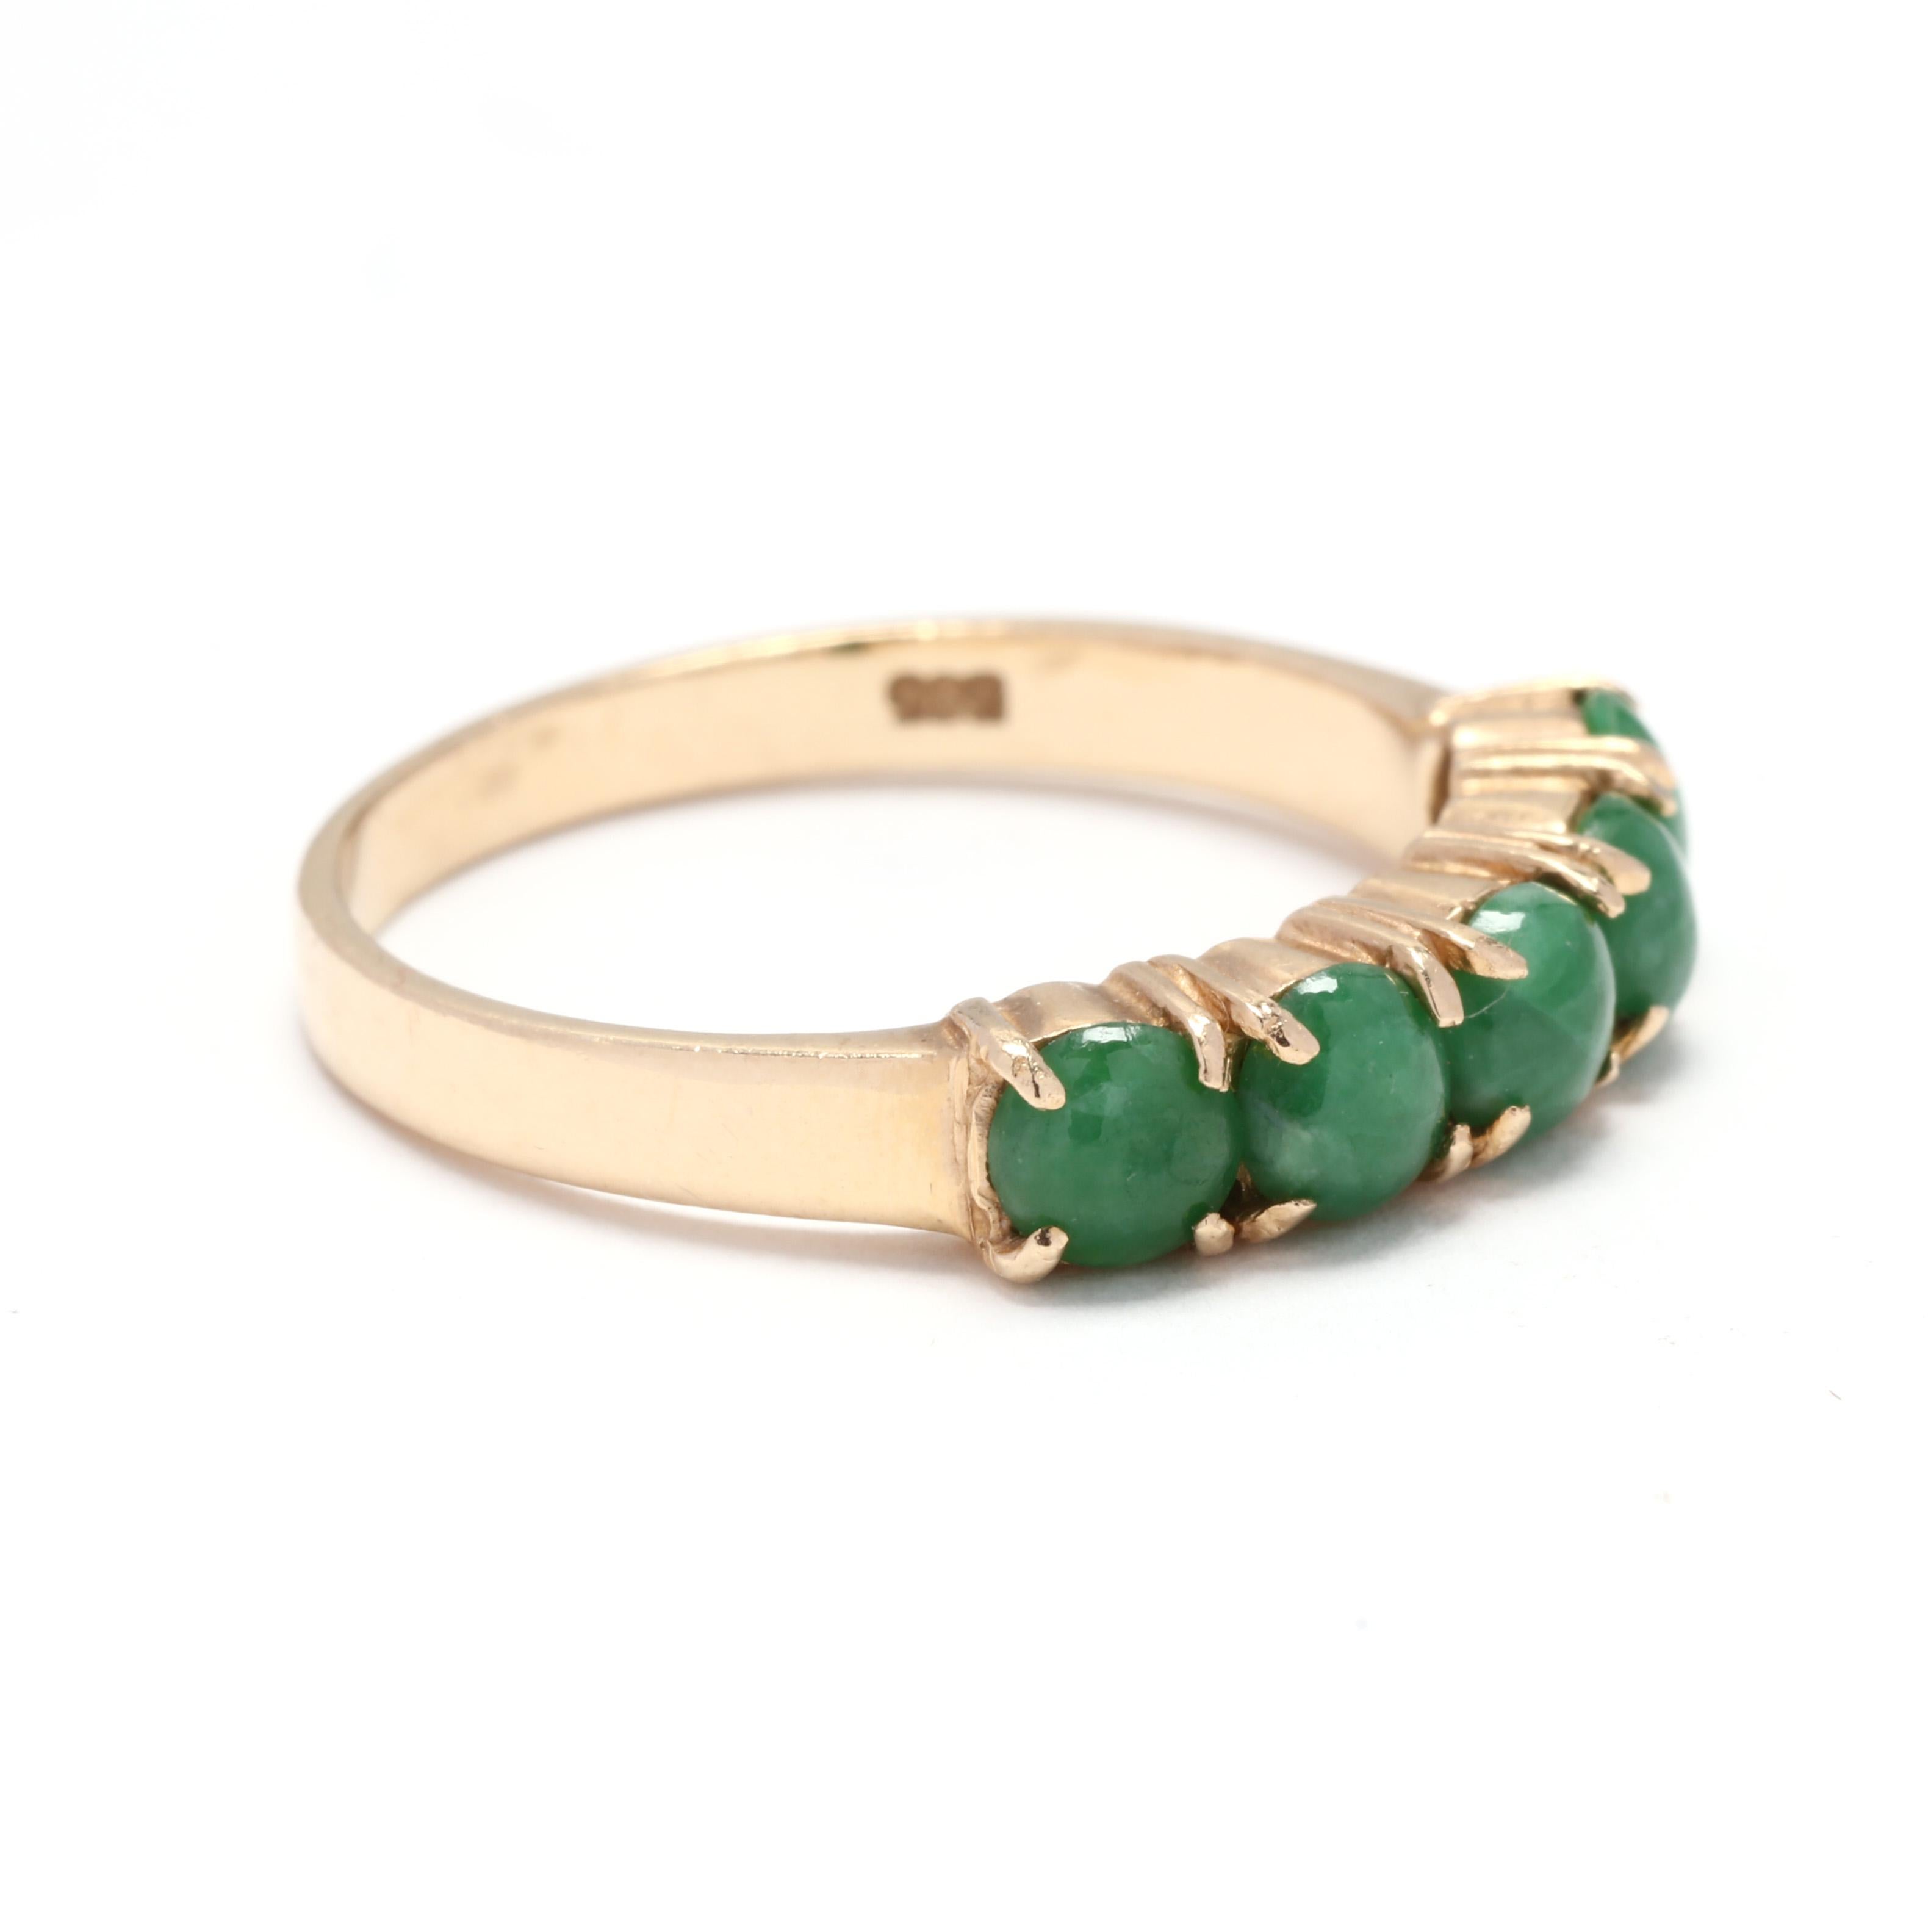 Vintage 14 karat yellow gold jade five stone stackable band ring. This ring features a five stone design with prong set, round cabochon cut jade stones and a slightly tapered band.

Stones:
- jade, 5 stones
- round  cabochon
- 4.1 - 4.25 mm

Ring